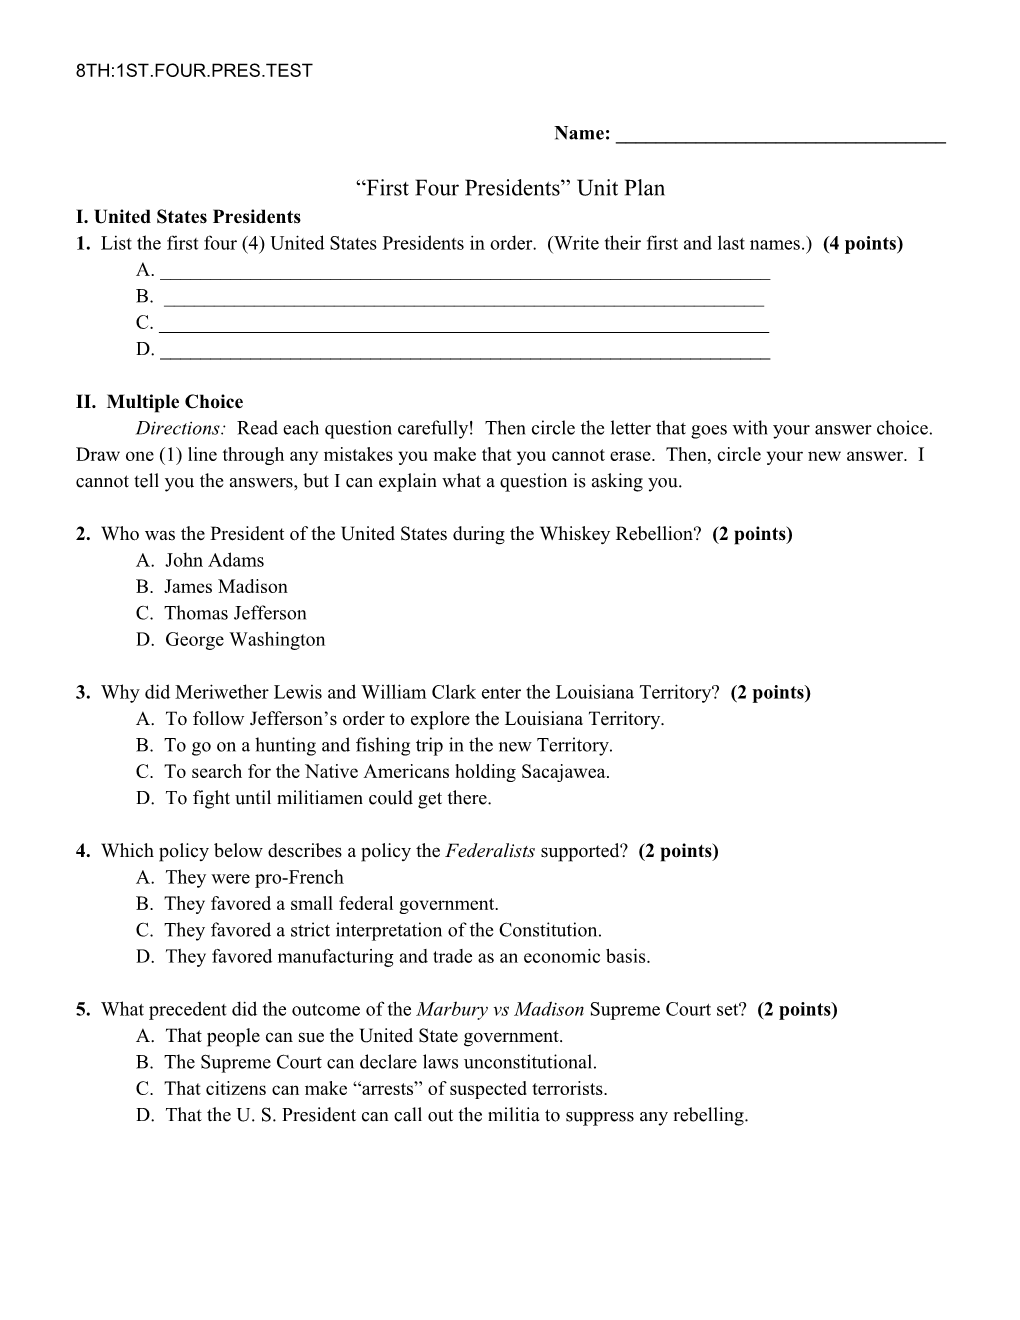 First Four Presidents Unit Plan